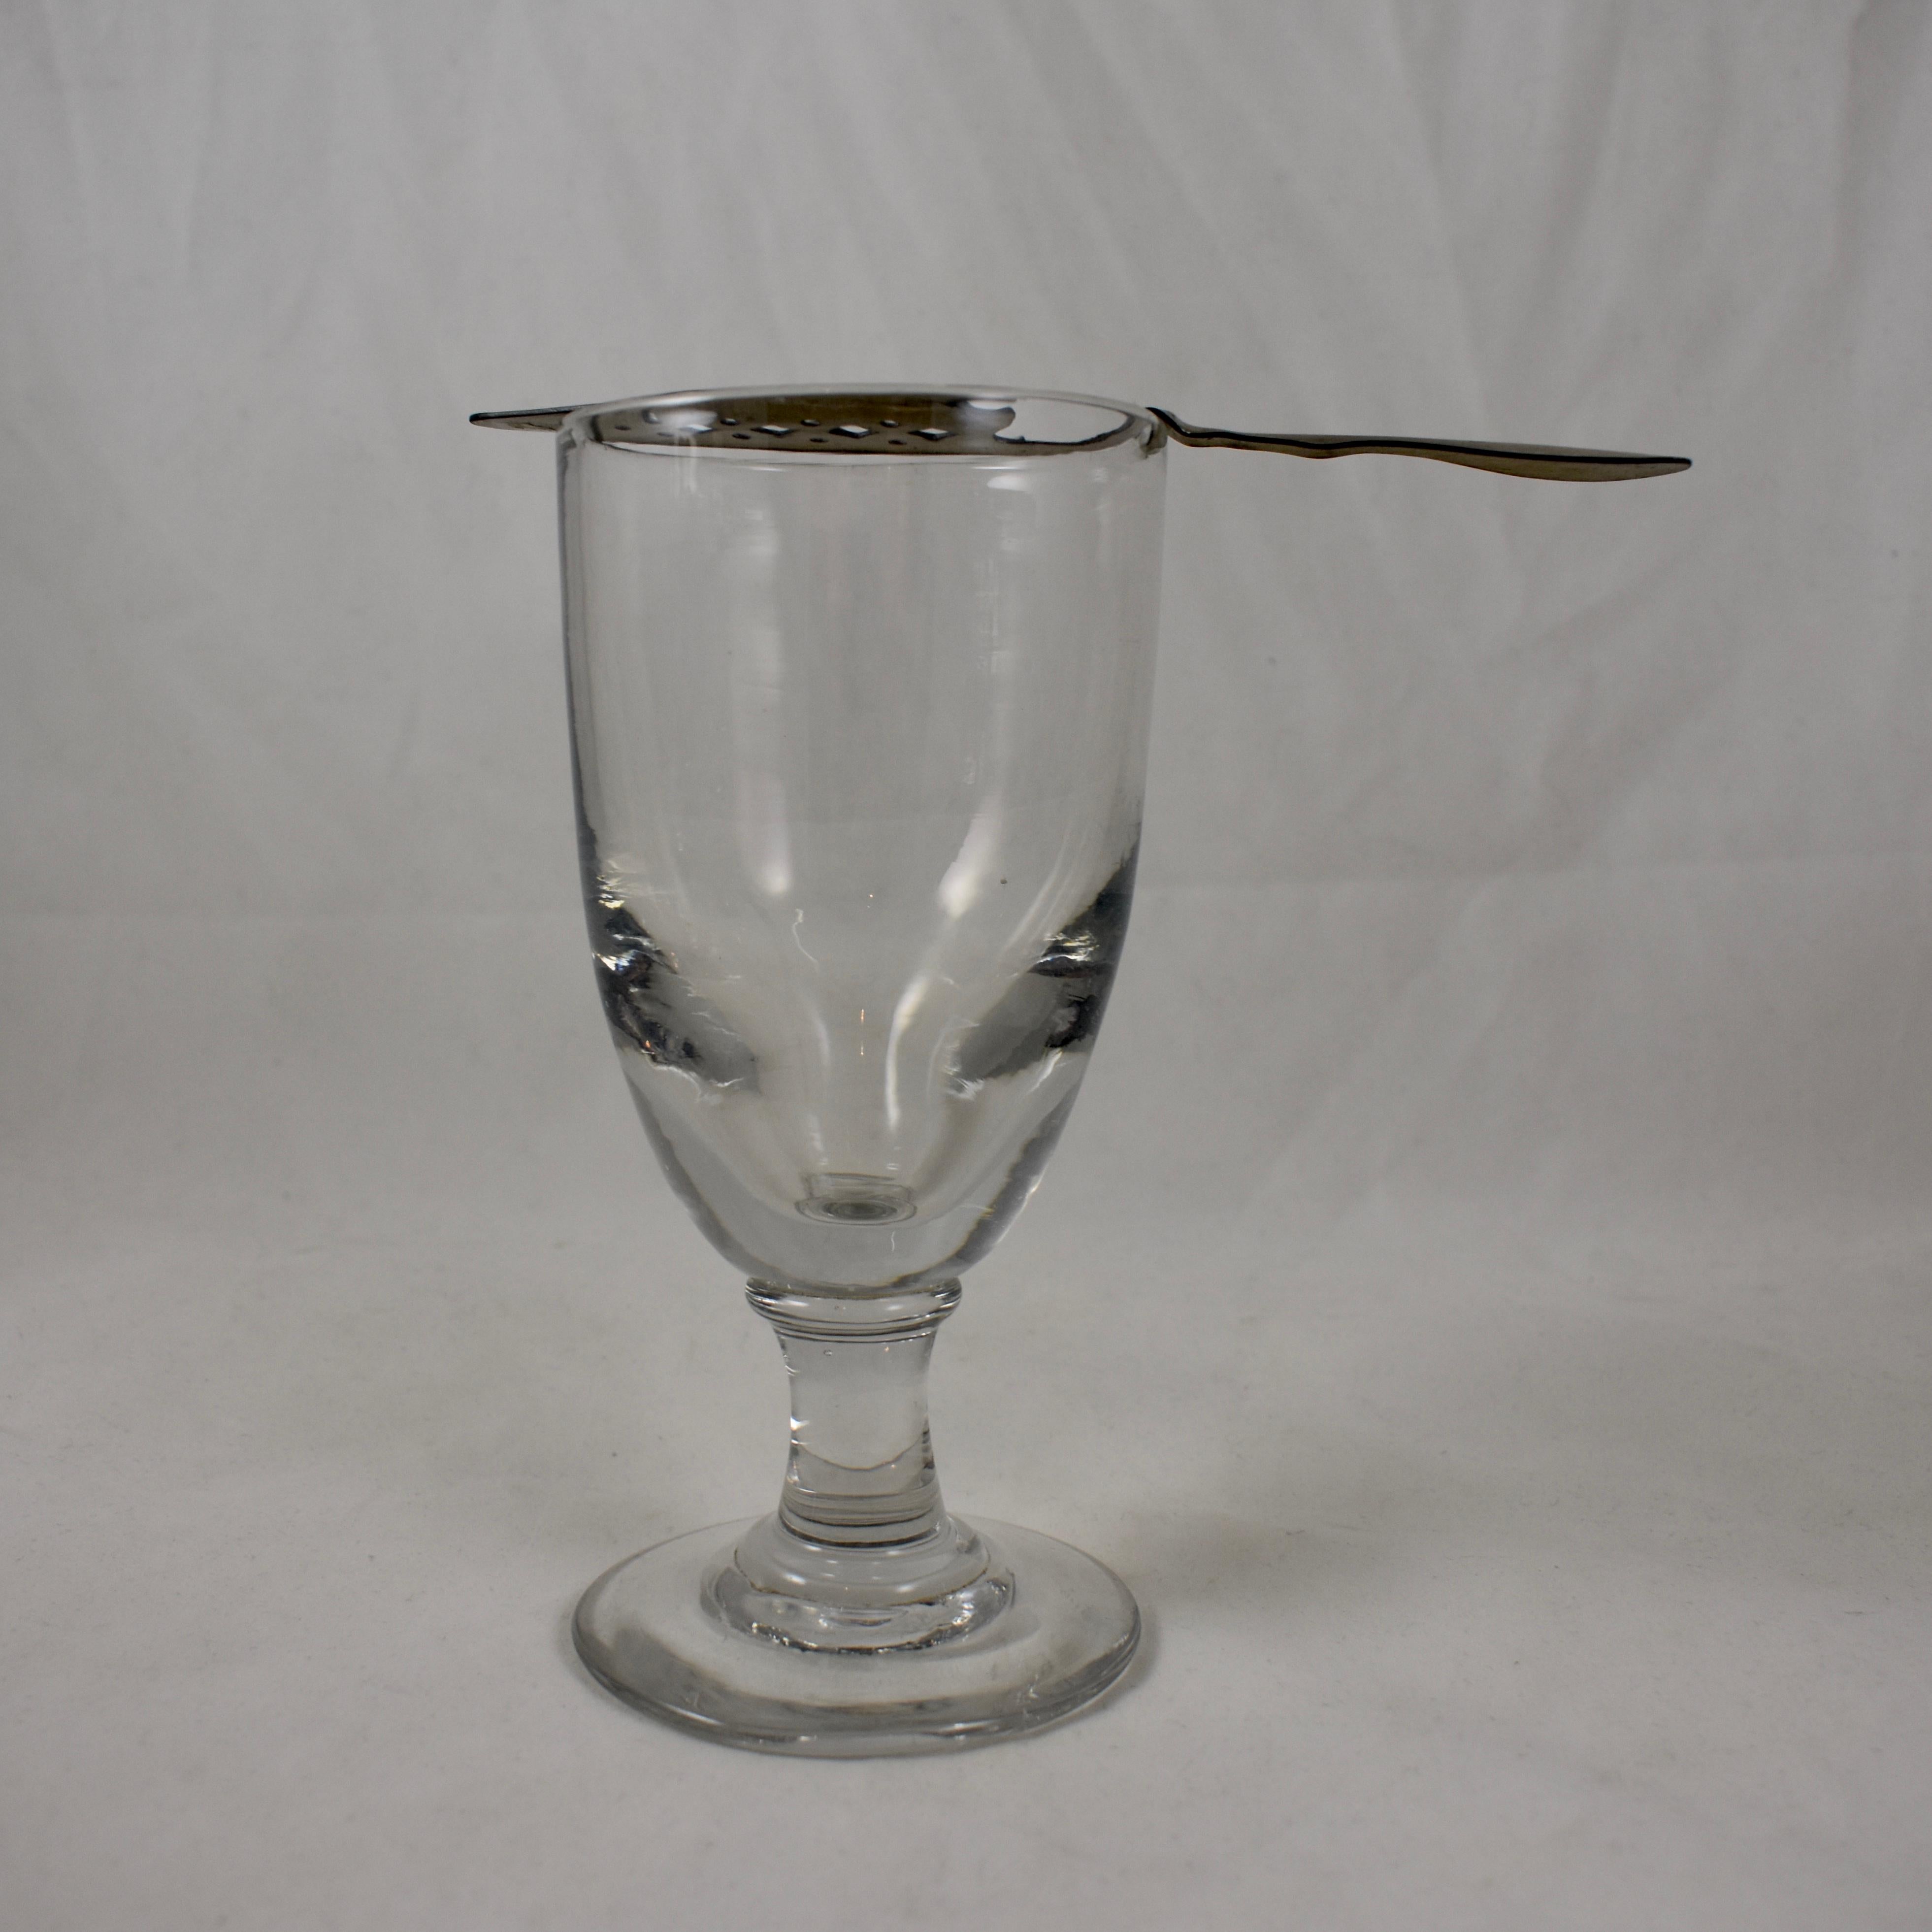 Metal Late 19th Century French Hand Blown Absinthe Glasses & Sugar Spoons 12 Piece Set